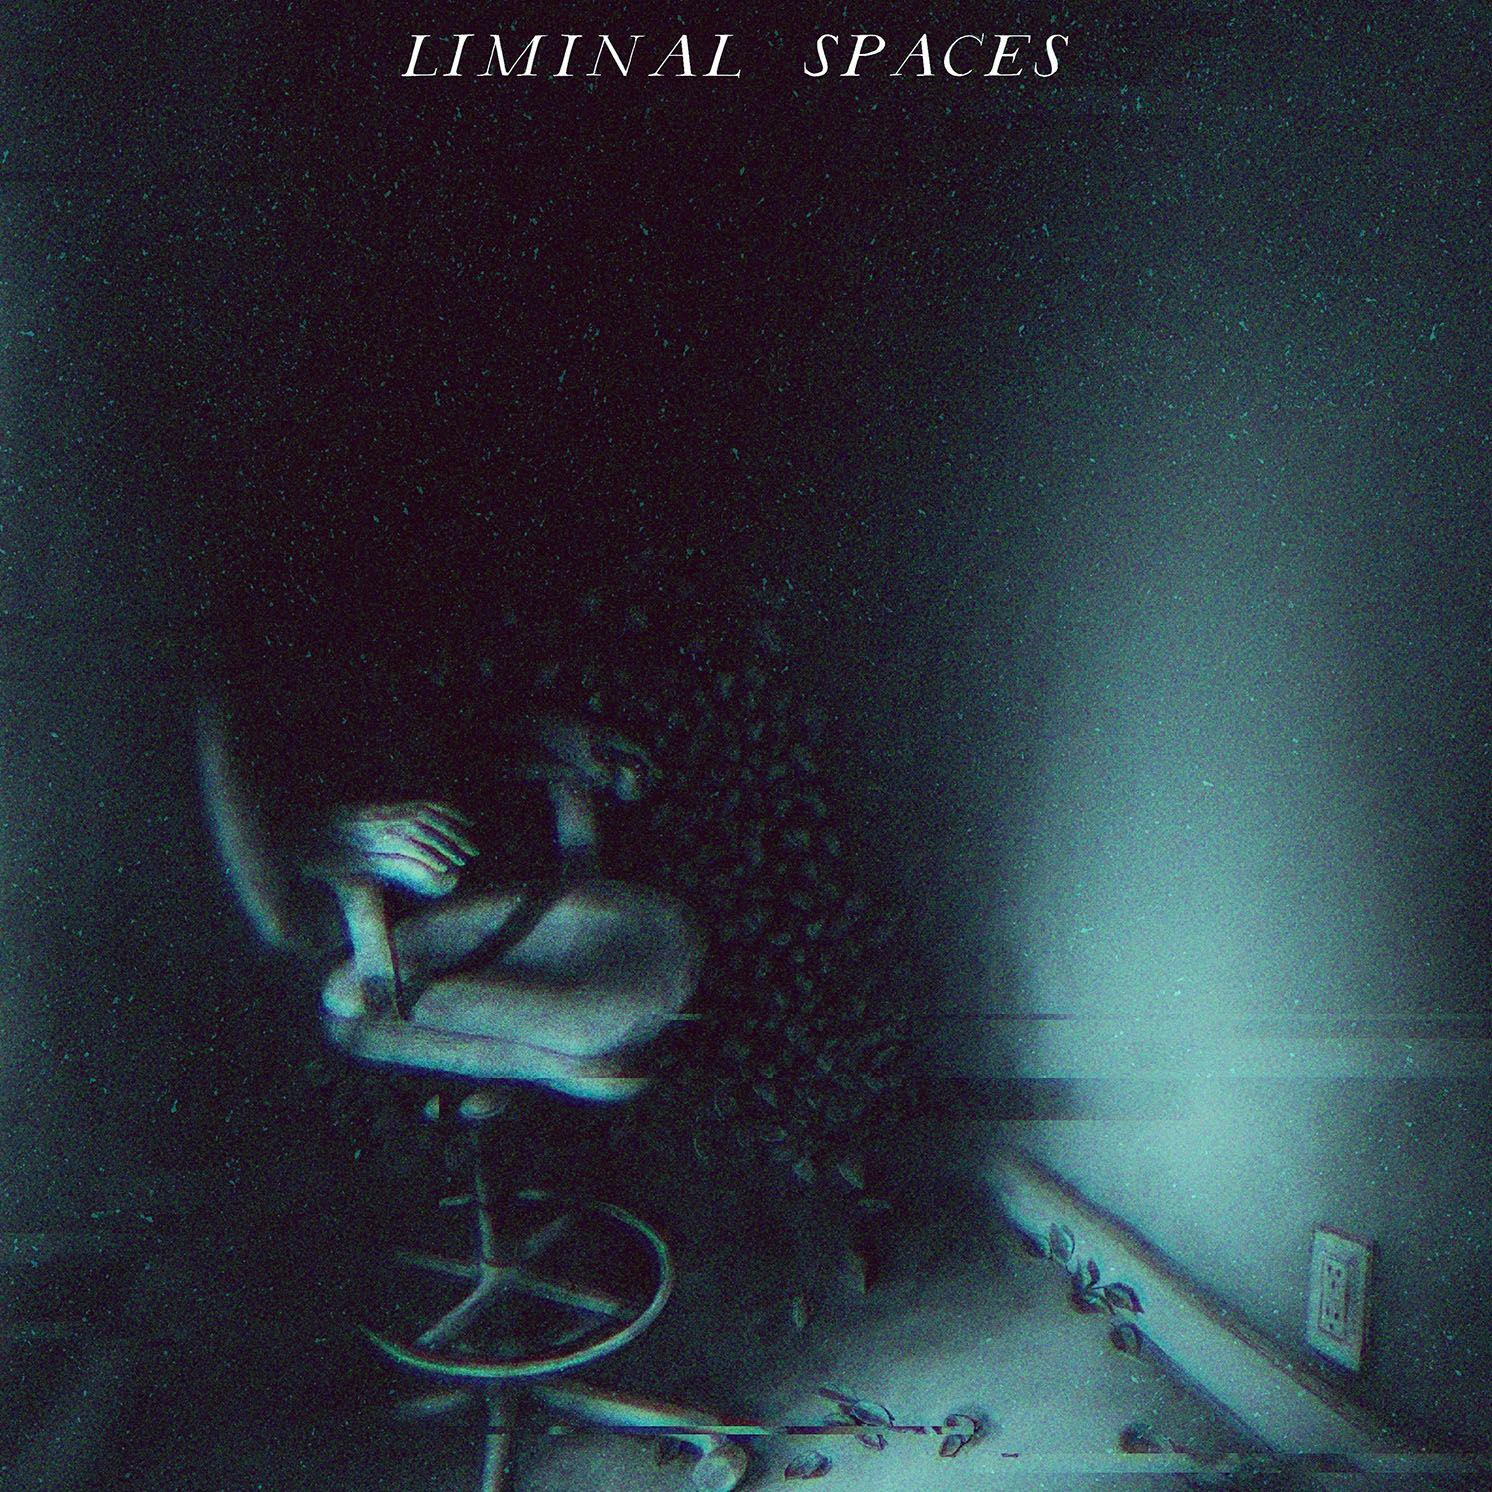 Thumbnail for "224 - Liminal Spaces".